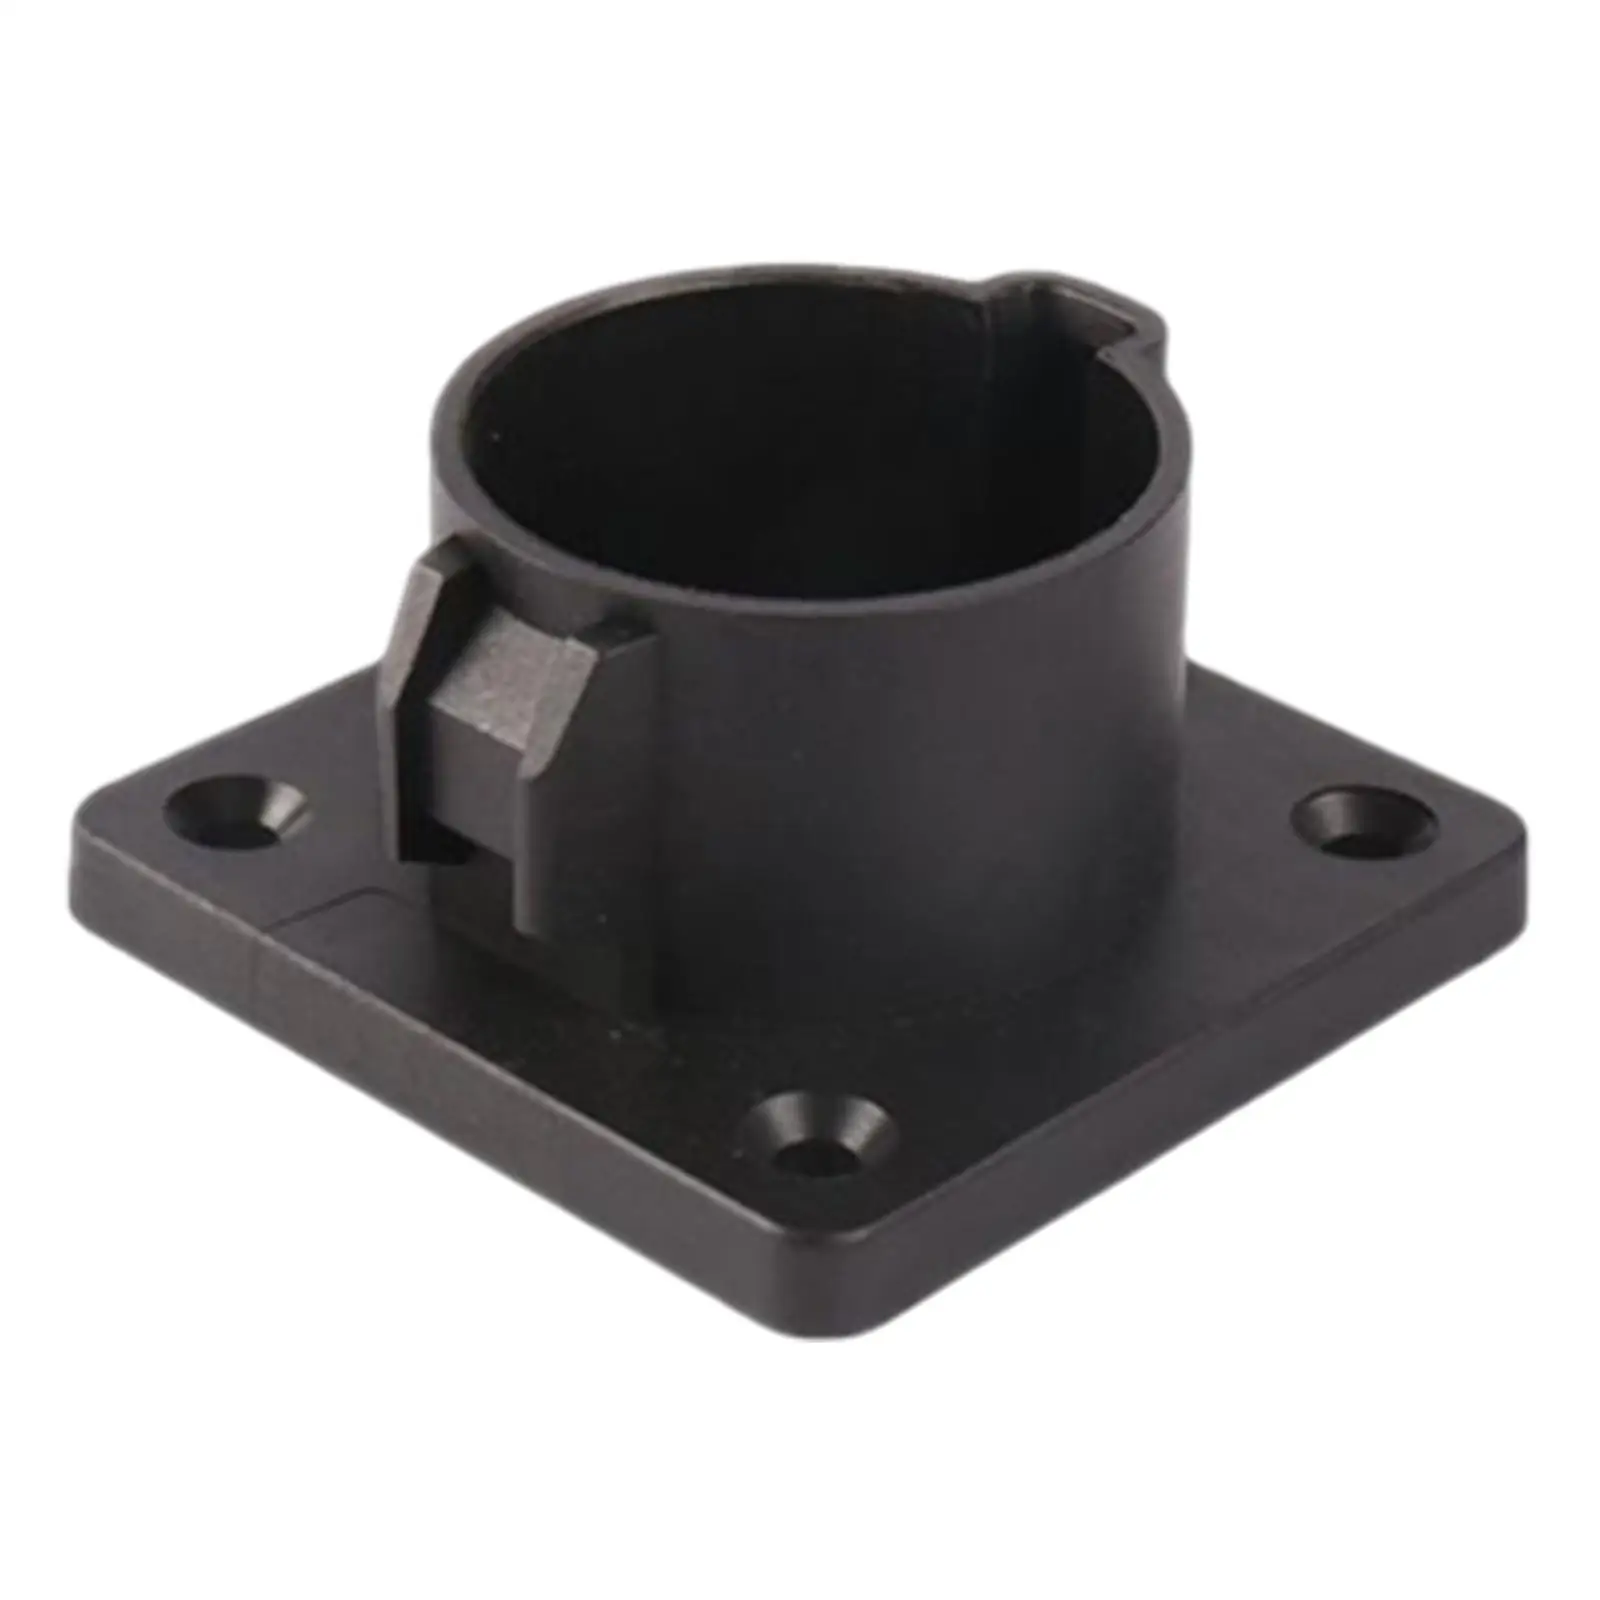   Dock ,5 Holes  Dock Charging Plug Holder Fits for SAE J1772 Connector Easy Installation Vehicle Parts Car Supplies